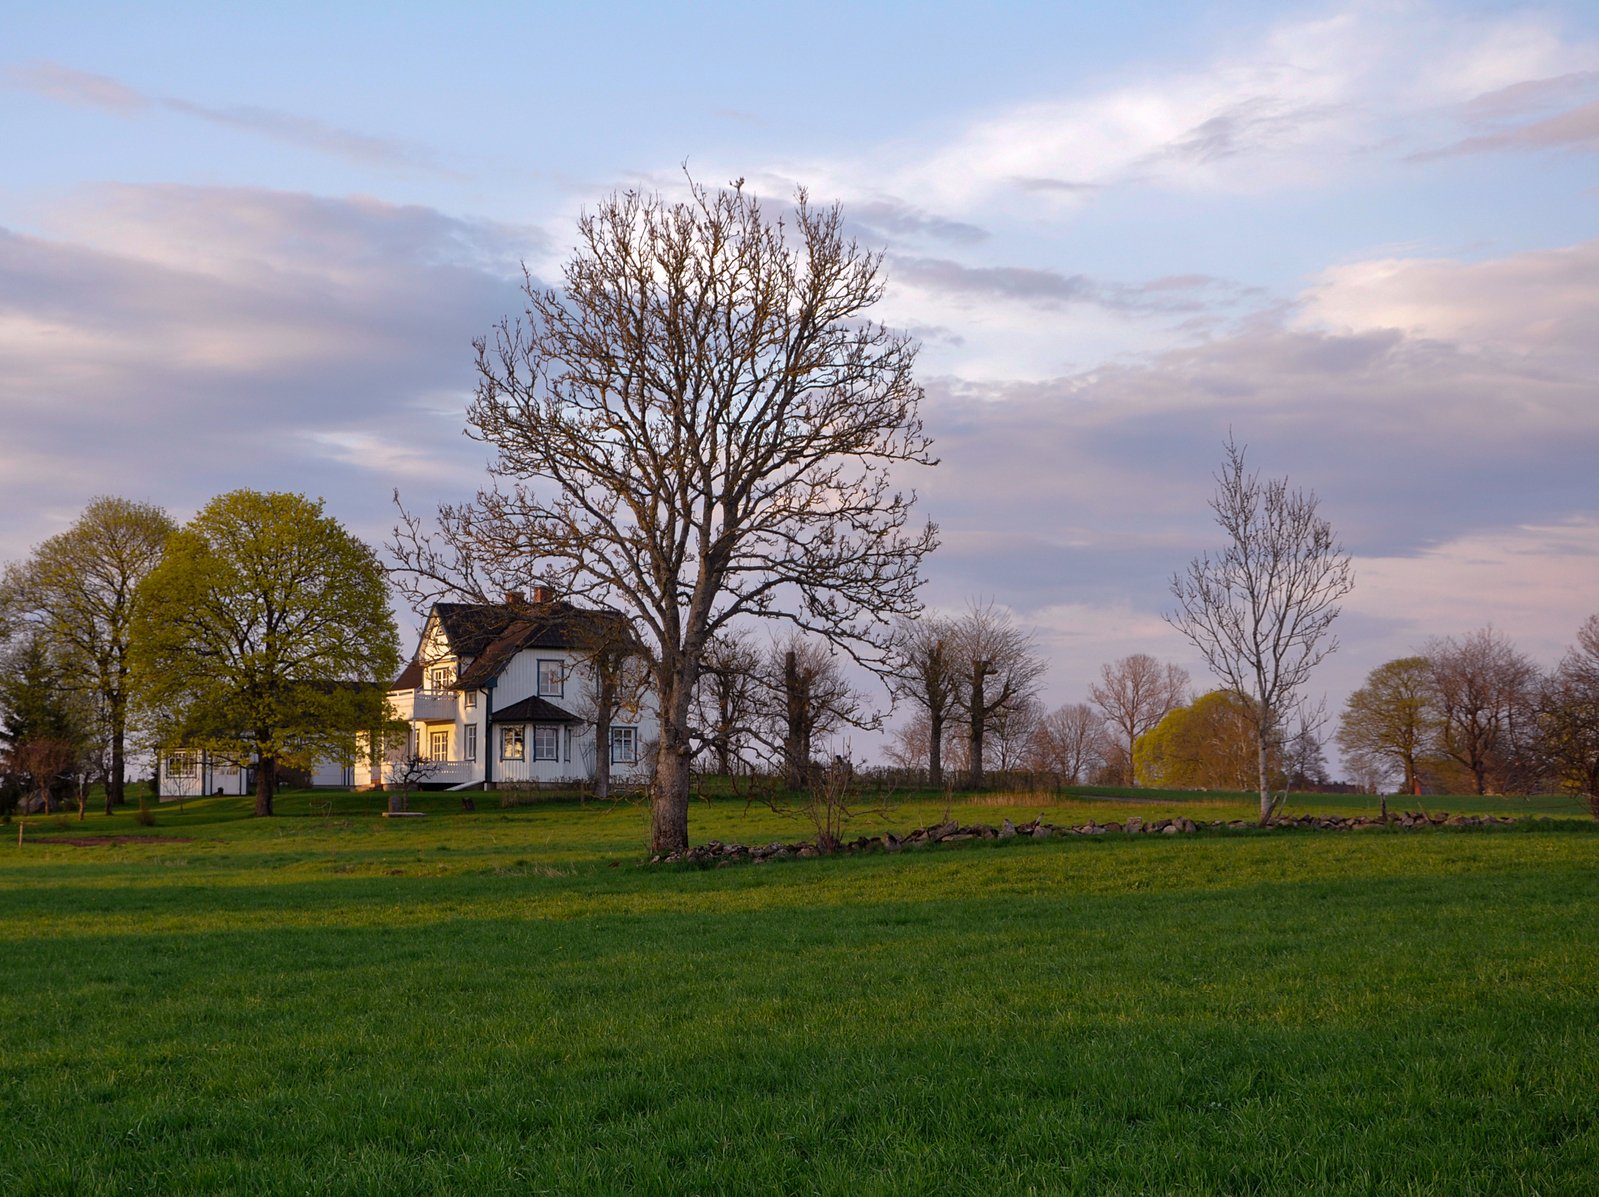 the house is surrounded by some trees in a field